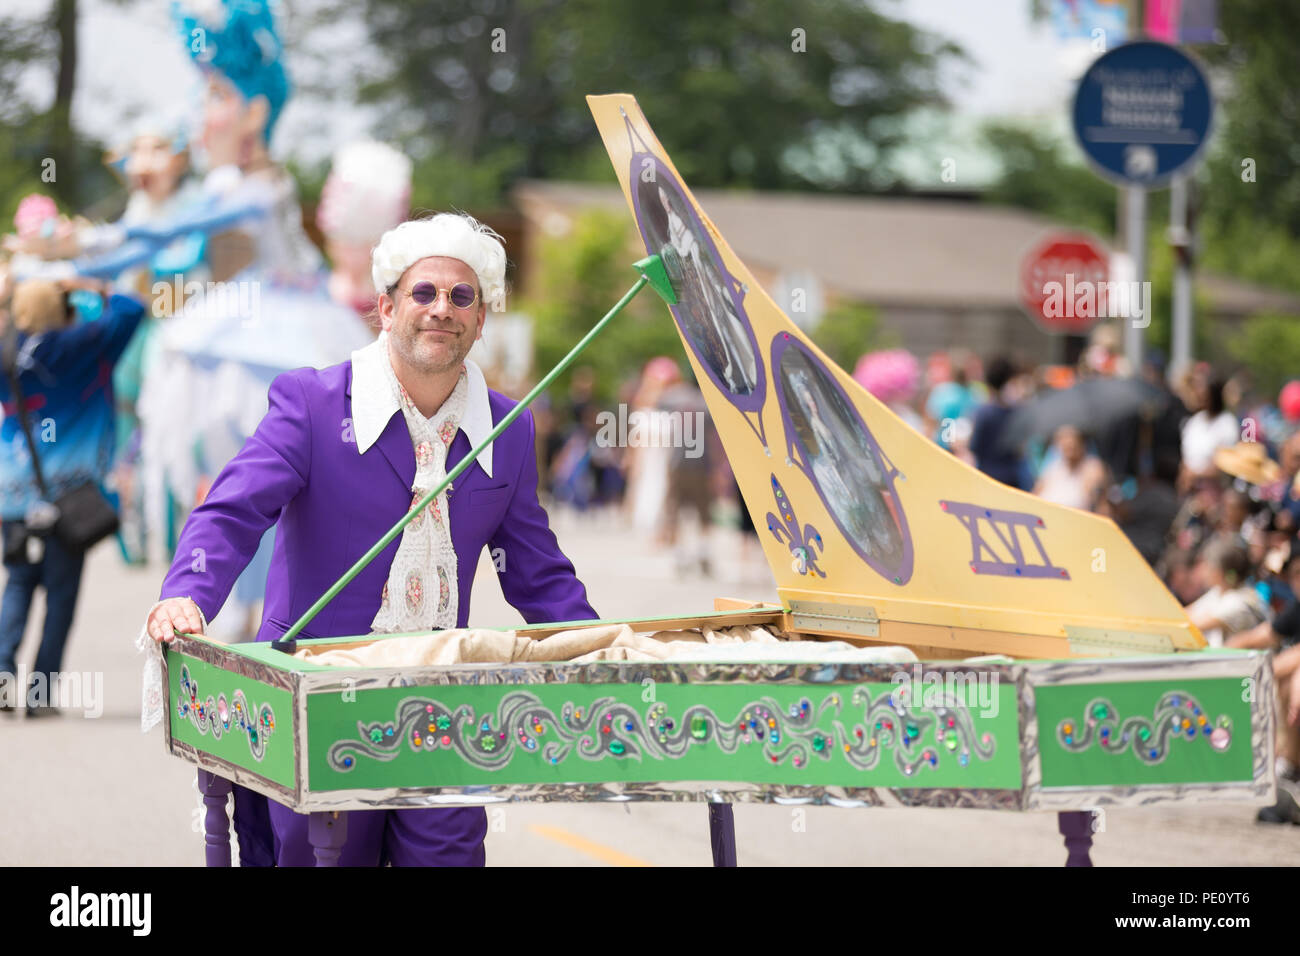 Cleveland, Ohio, USA - June 9, 2018 man pretends to play the piano wearing a white wig and purple glasses At the abstract art festival Parade The Circ Stock Photo